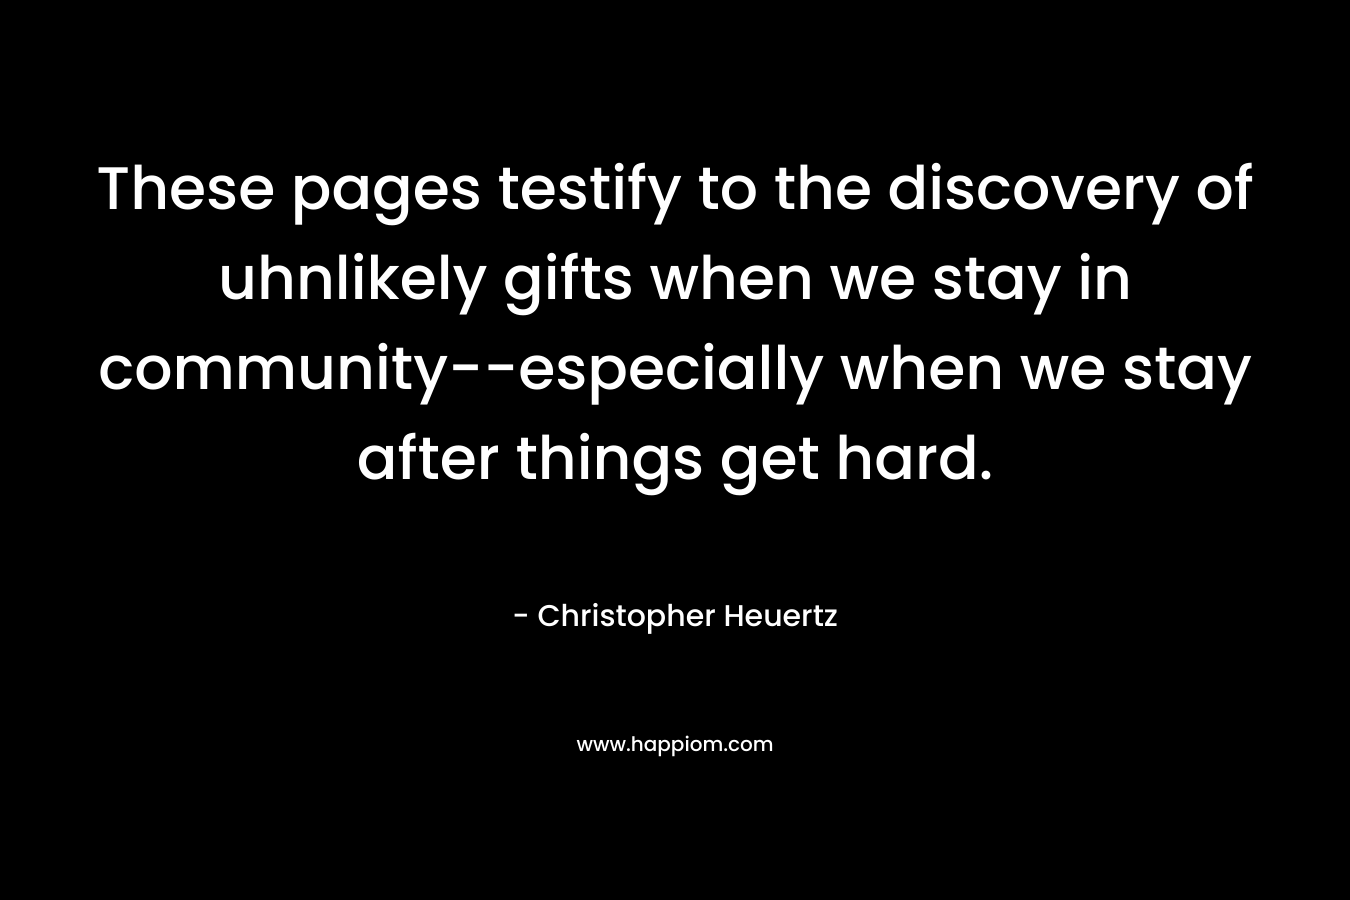 These pages testify to the discovery of uhnlikely gifts when we stay in community--especially when we stay after things get hard.